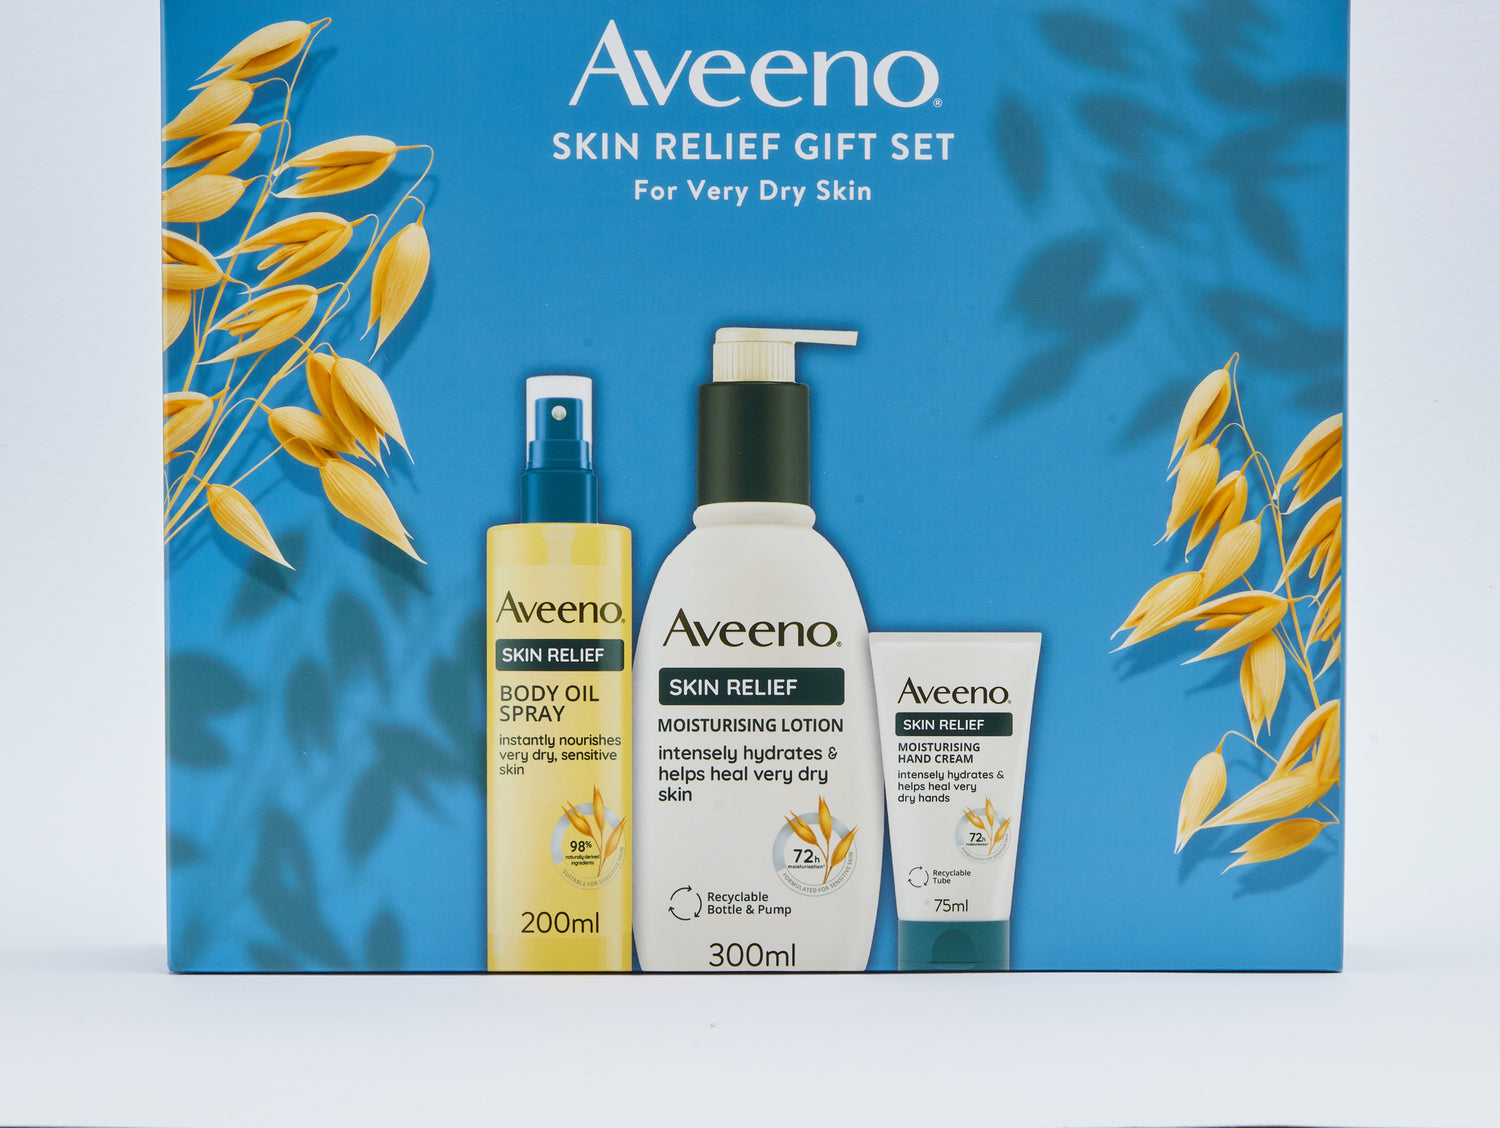 Aveeno Skin Relief Moisturizing Body and Hand Lotion for Dry Skin